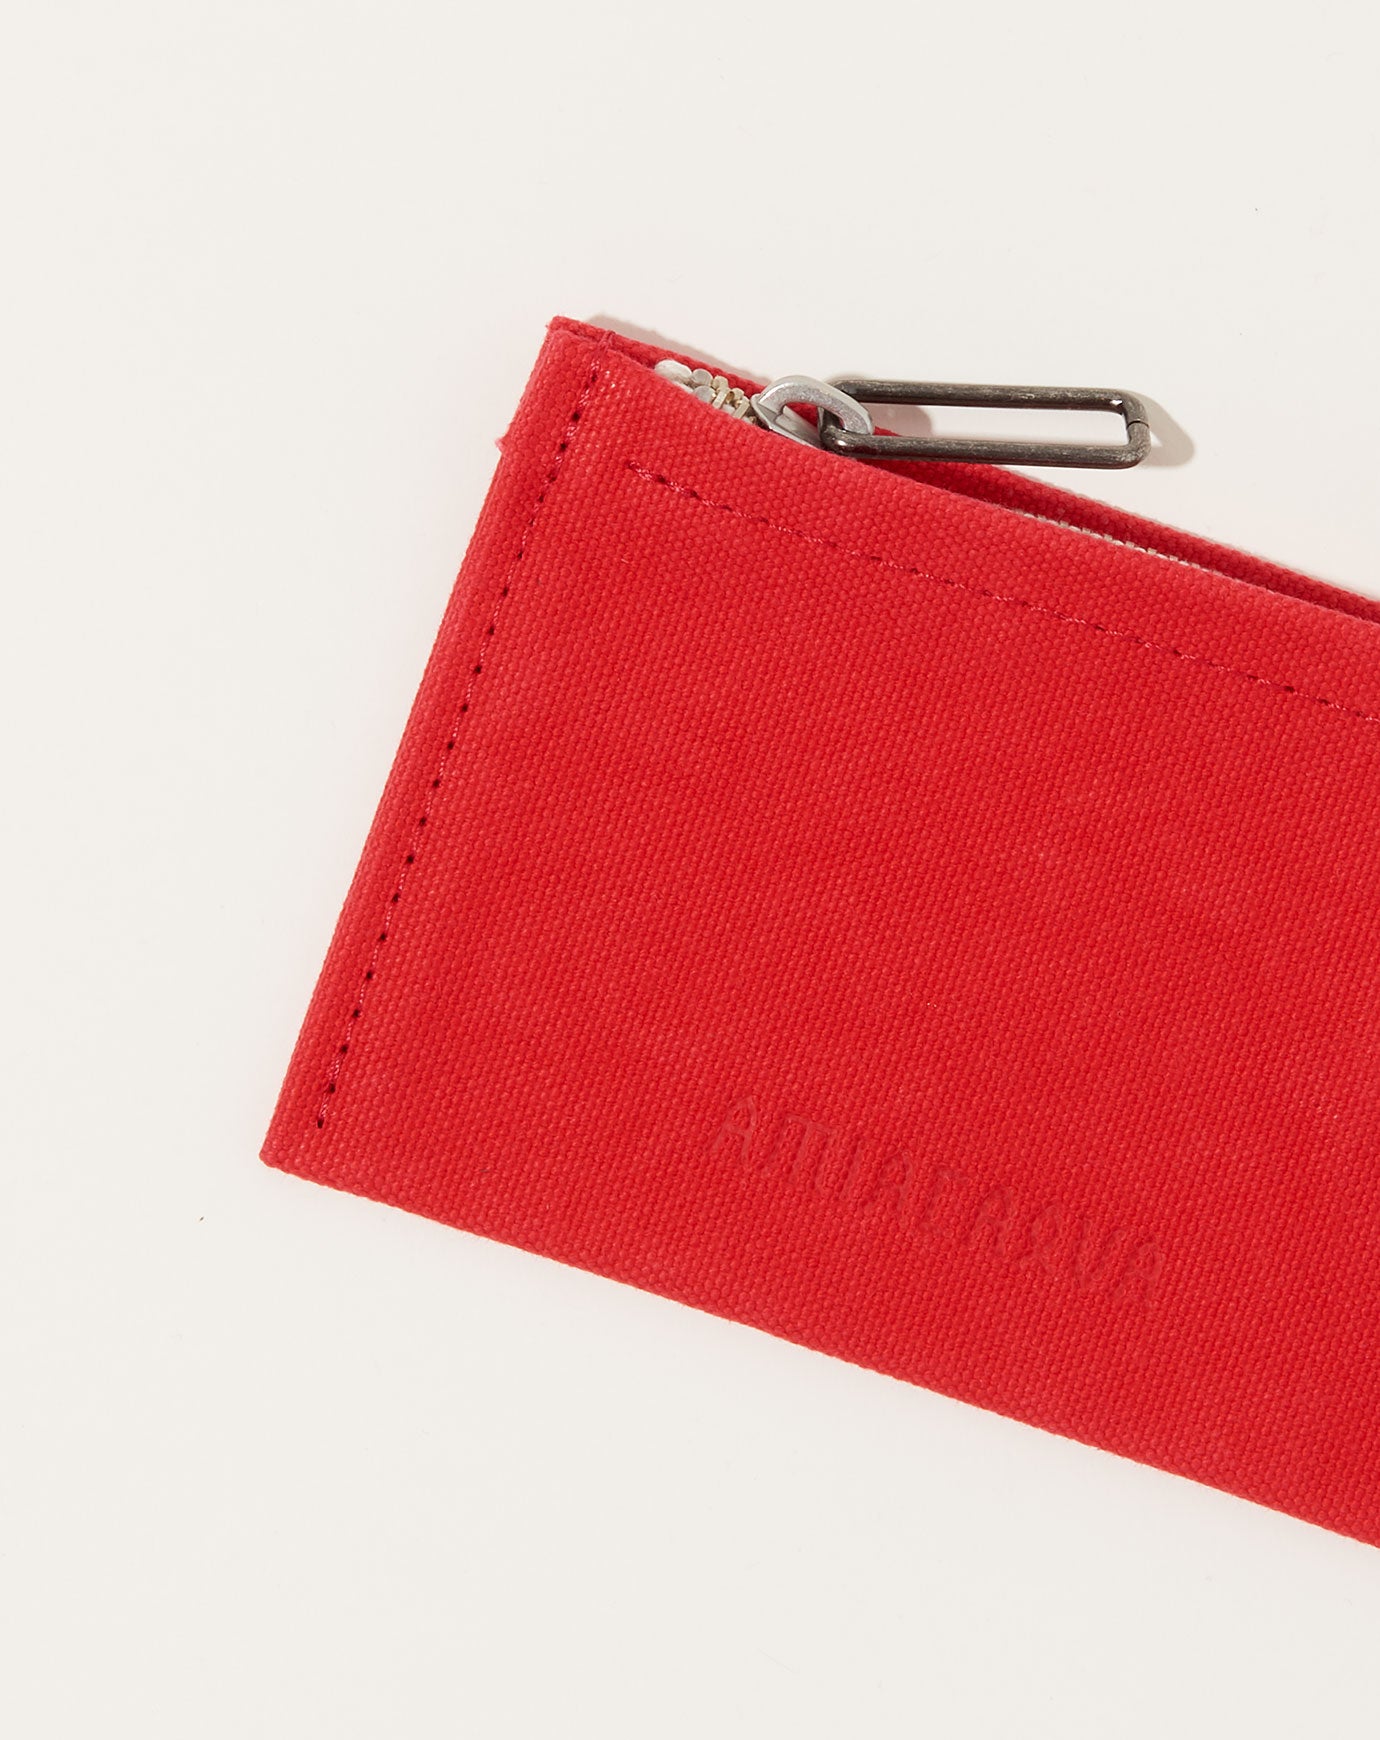 Amiacalva Washed Canvas Pouch in Red